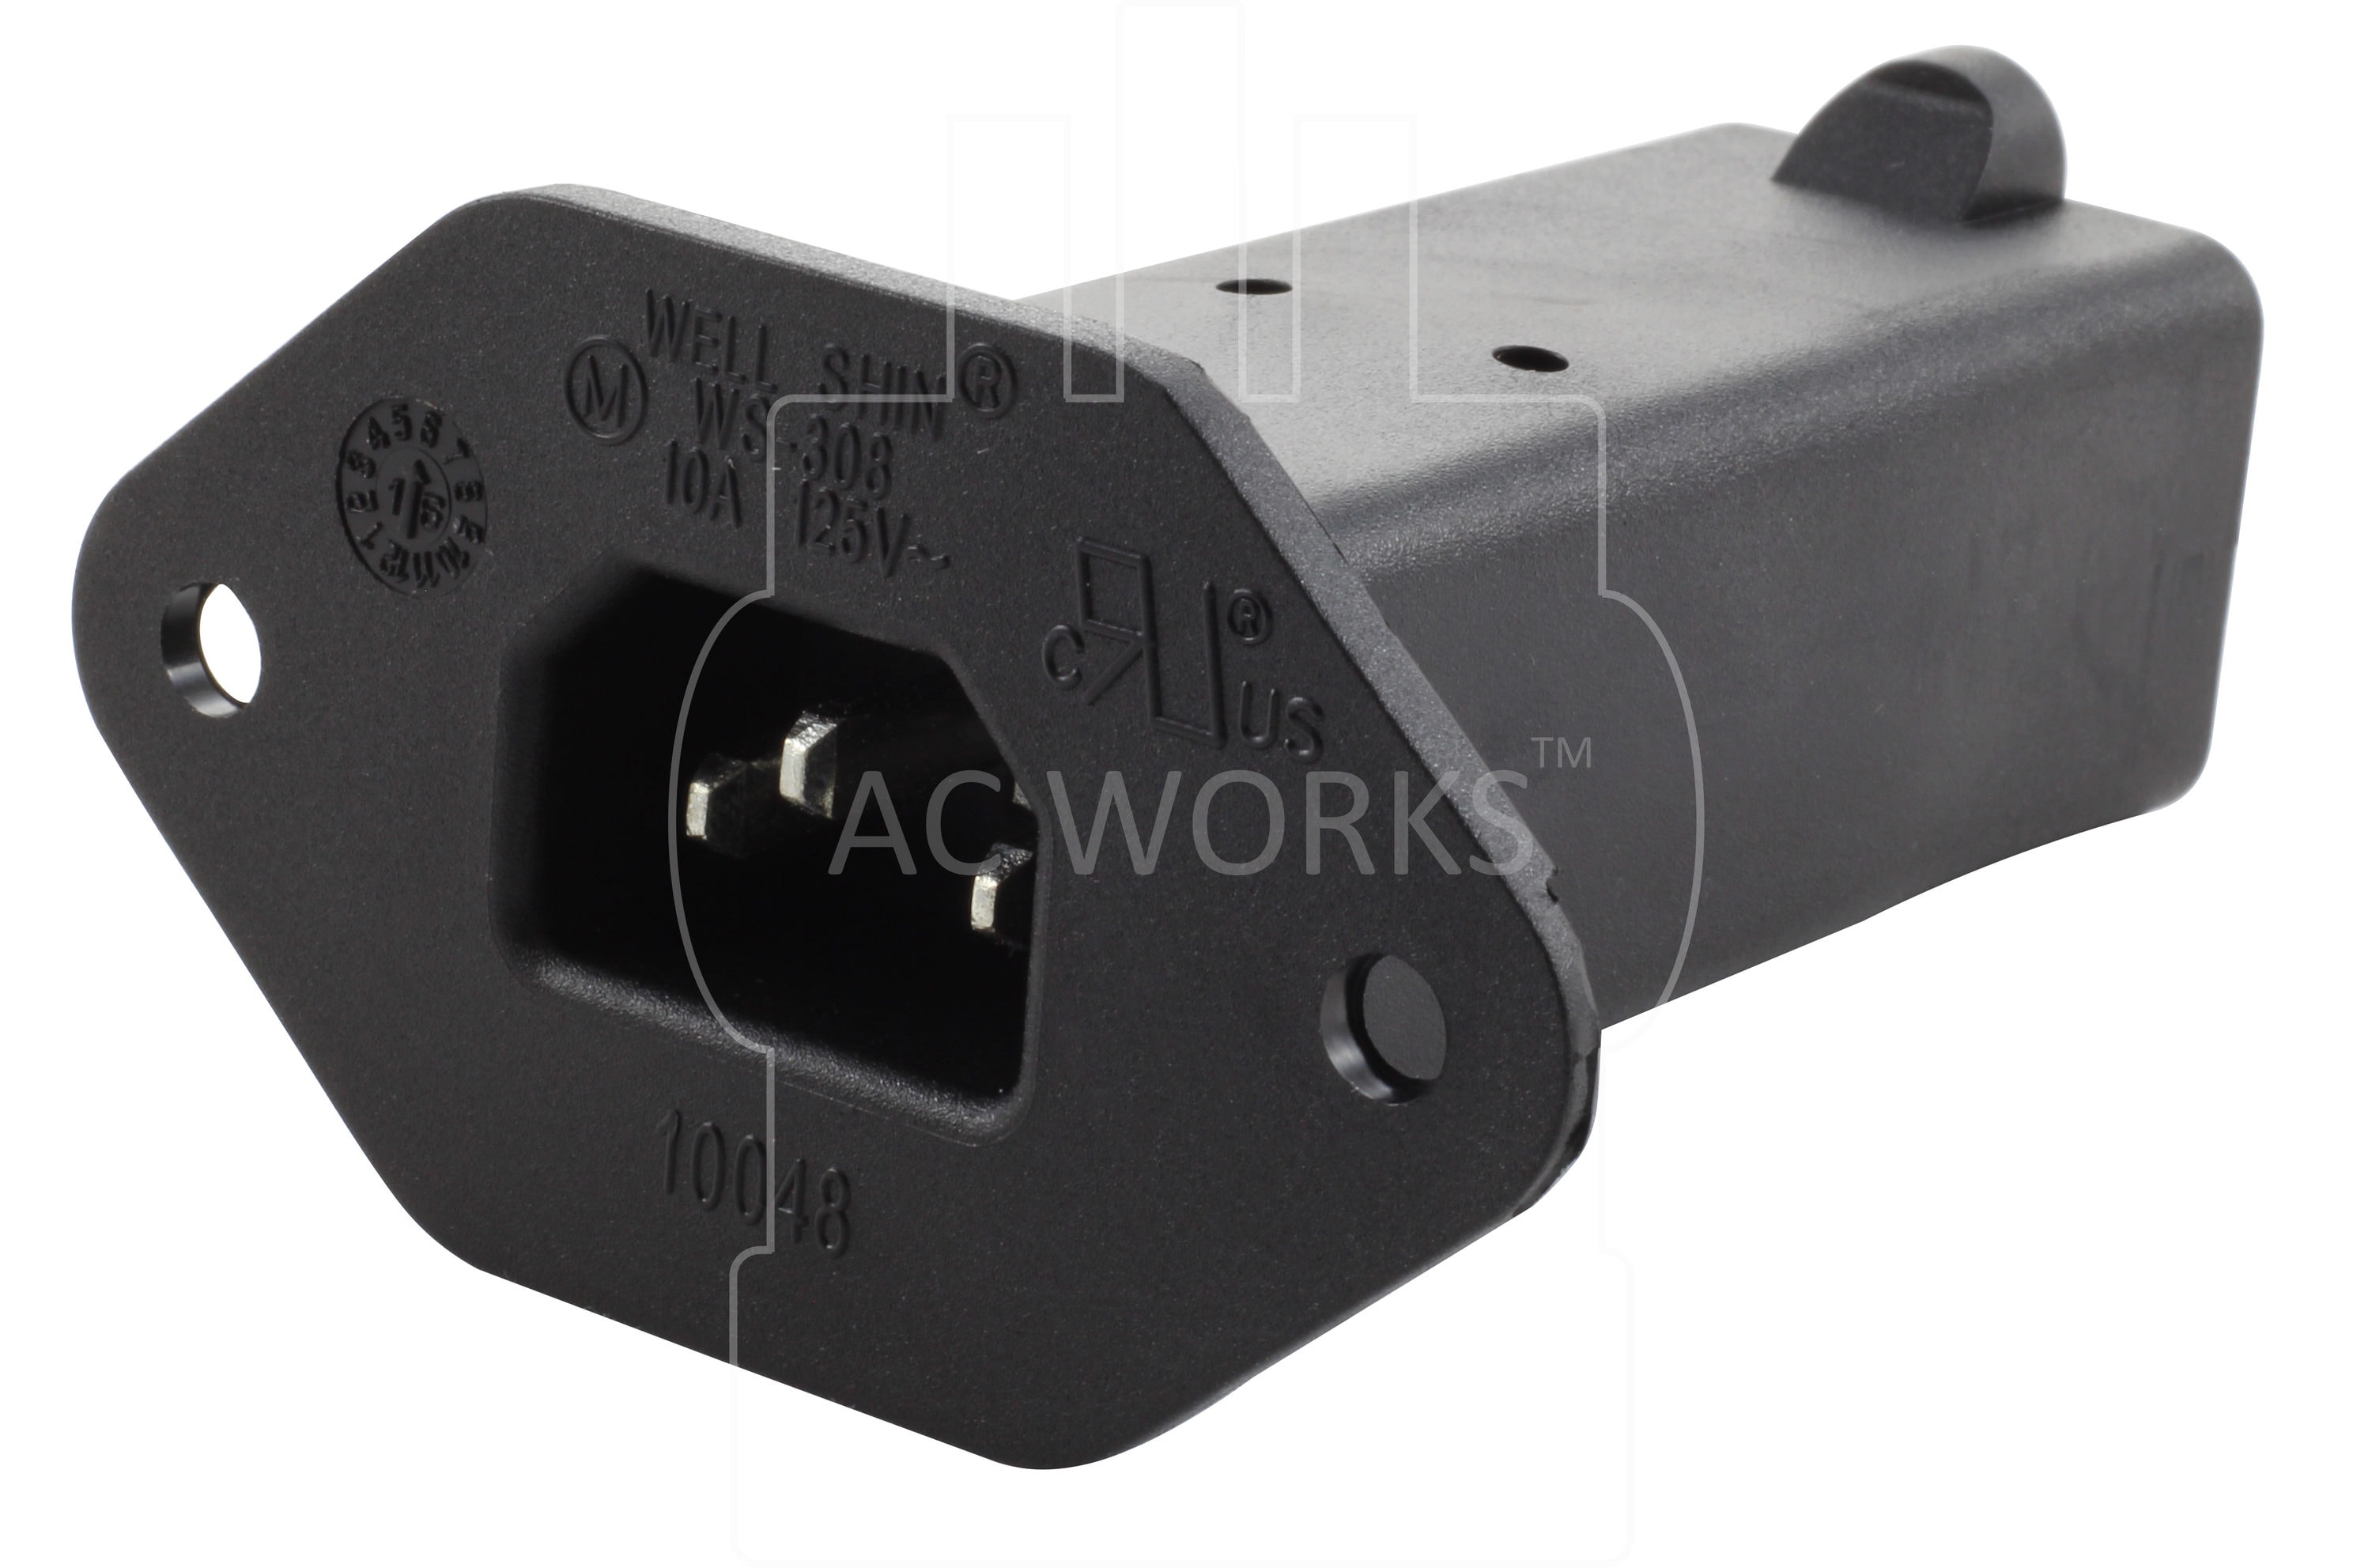 FRA018-S15-x - 15V/1.2A Wallmount type Indoor AC Adaptor with variety of AC  plugs - FranMar International Inc.